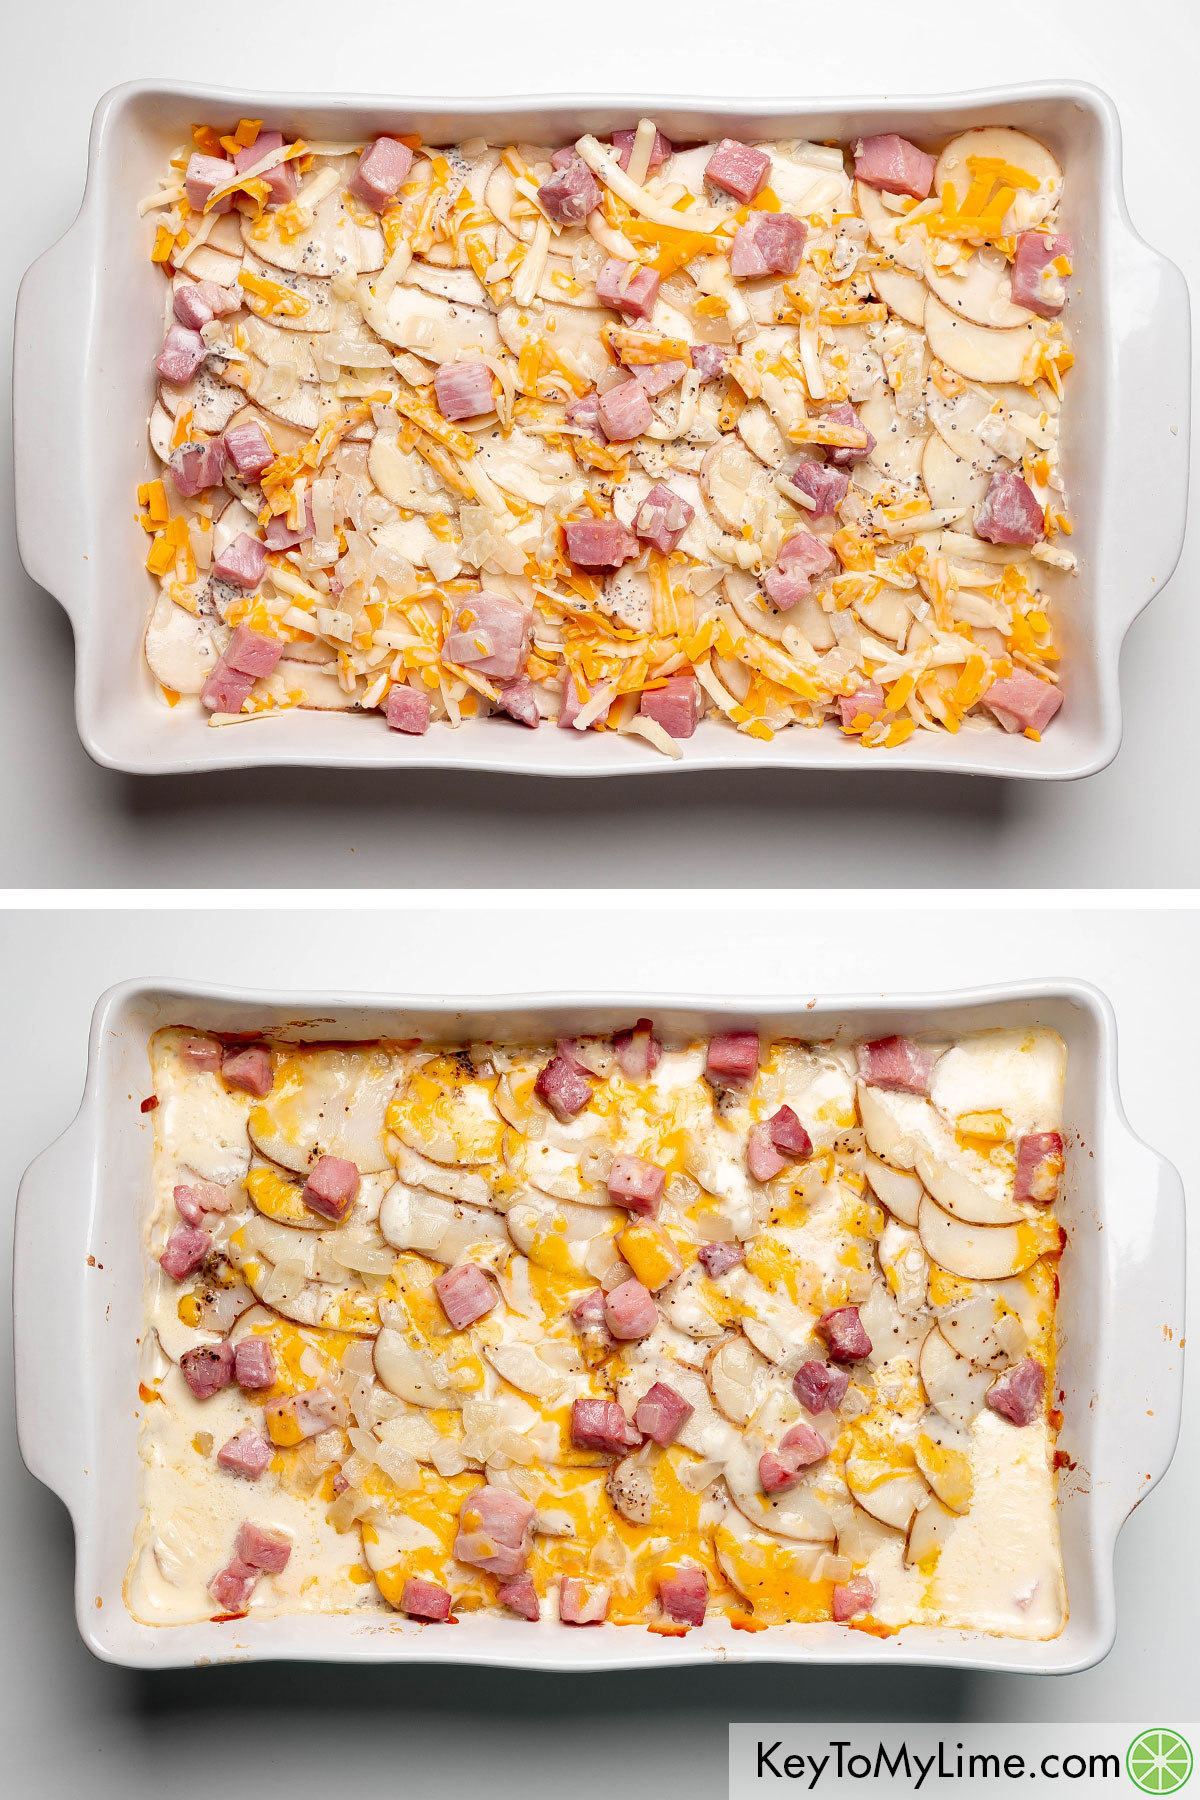 Adding the additional layers to form the ham and potato casserole.